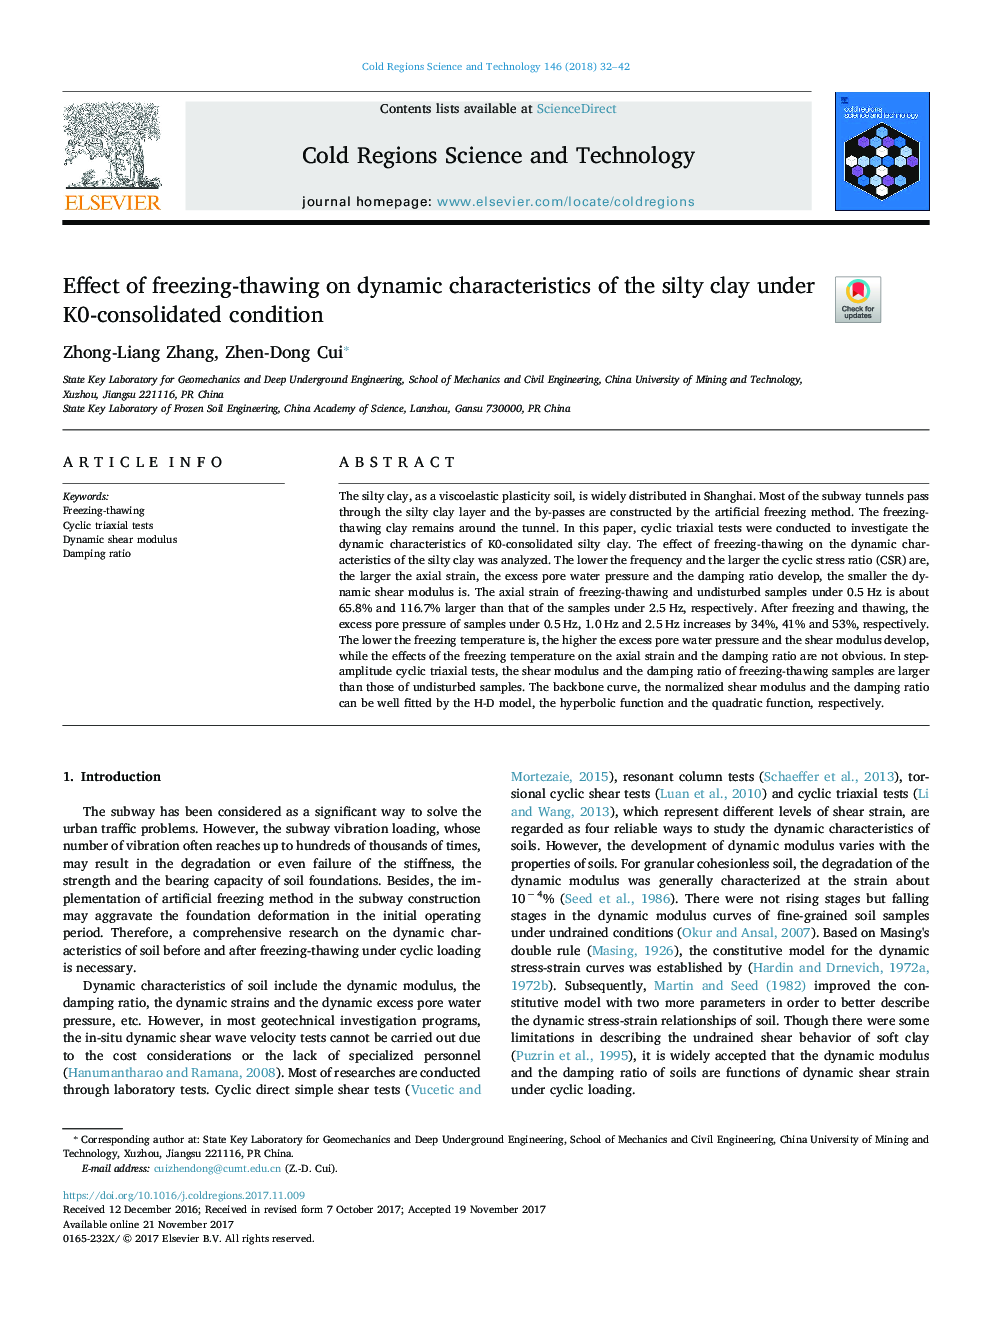 Effect of freezing-thawing on dynamic characteristics of the silty clay under K0-consolidated condition